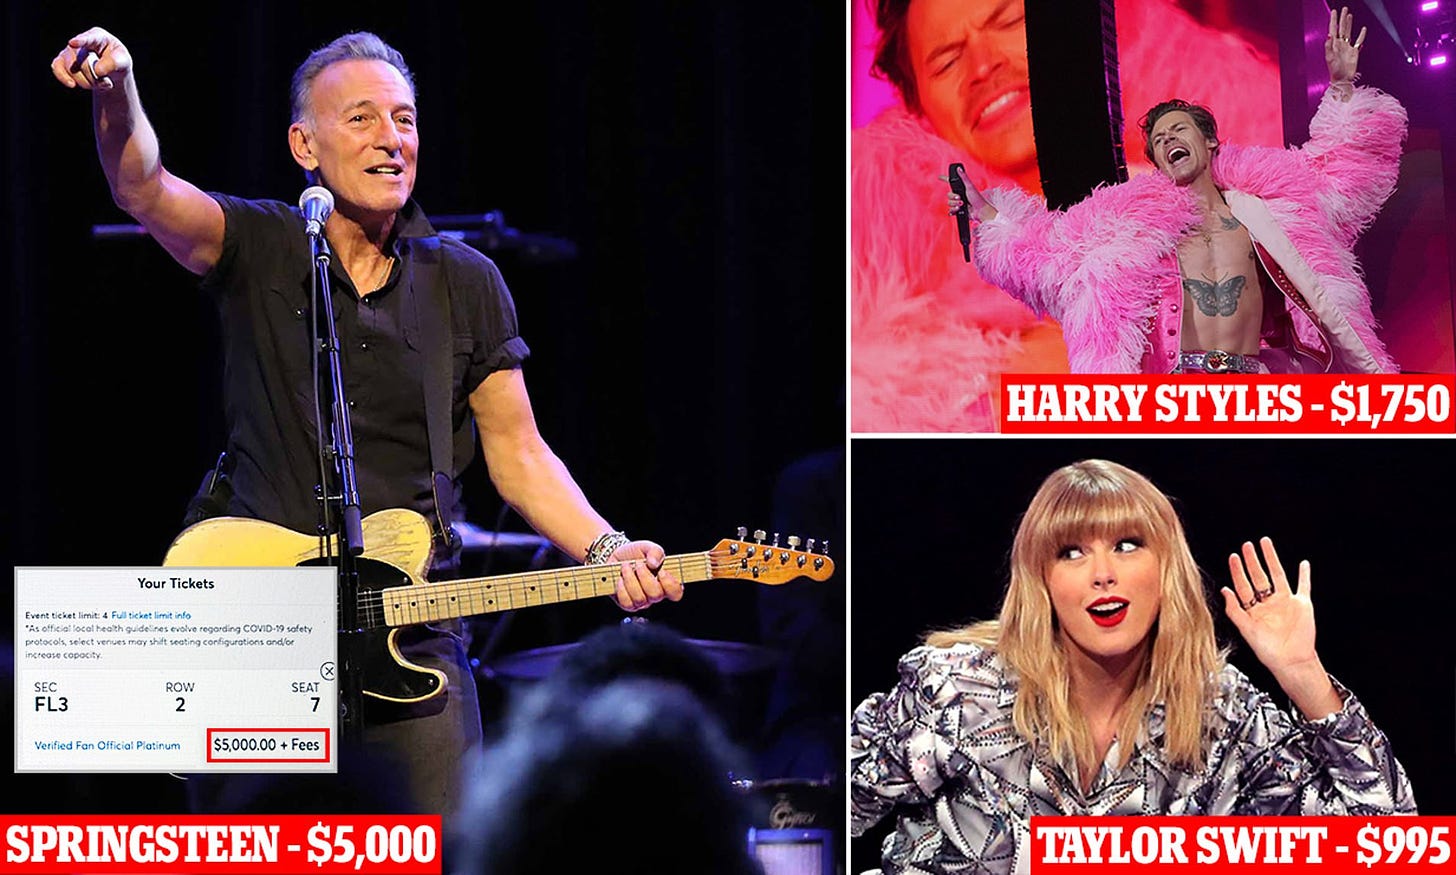 Tickermaster's new 'Dynamic Pricing' has forced Bruce Springsteen prices  high as $5,000 | Daily Mail Online